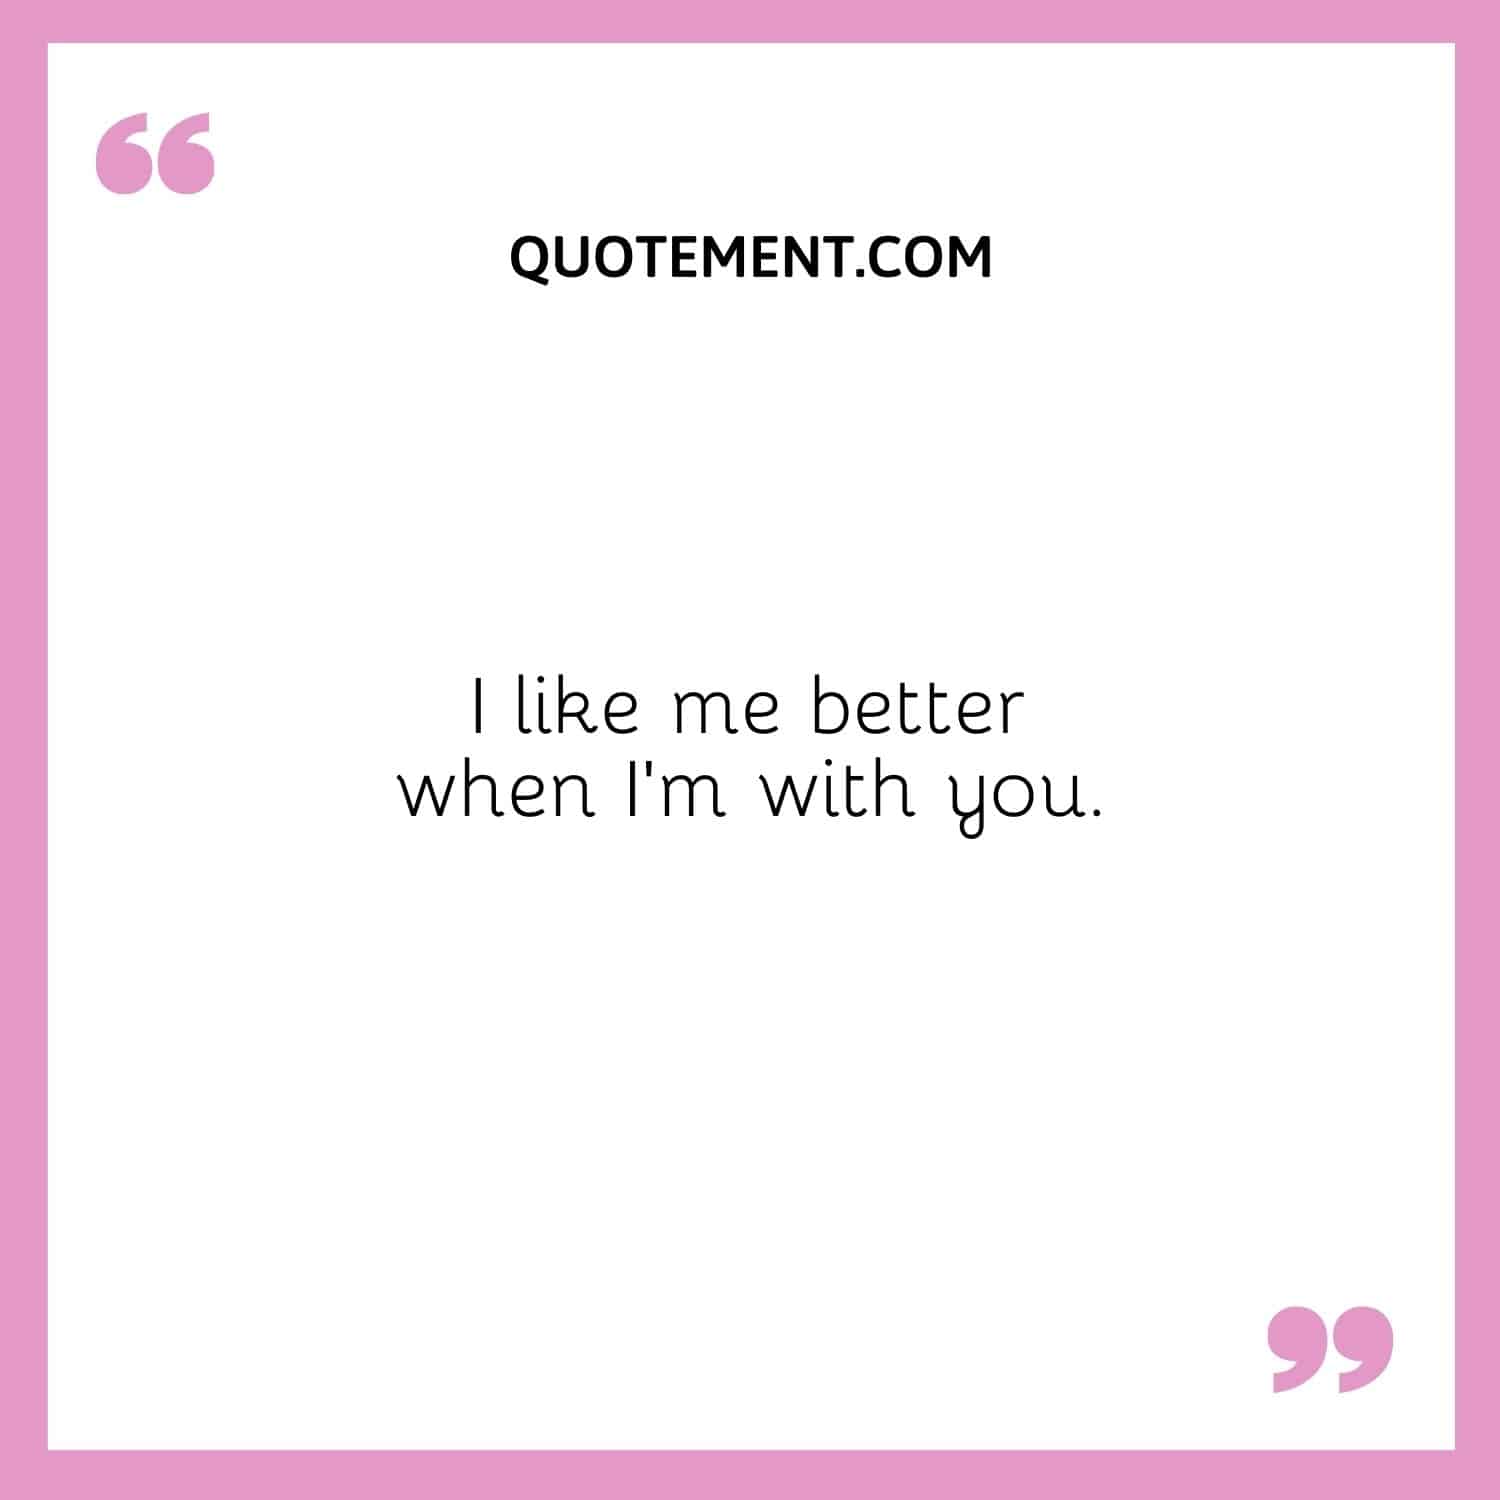 I like me better when I’m with you.